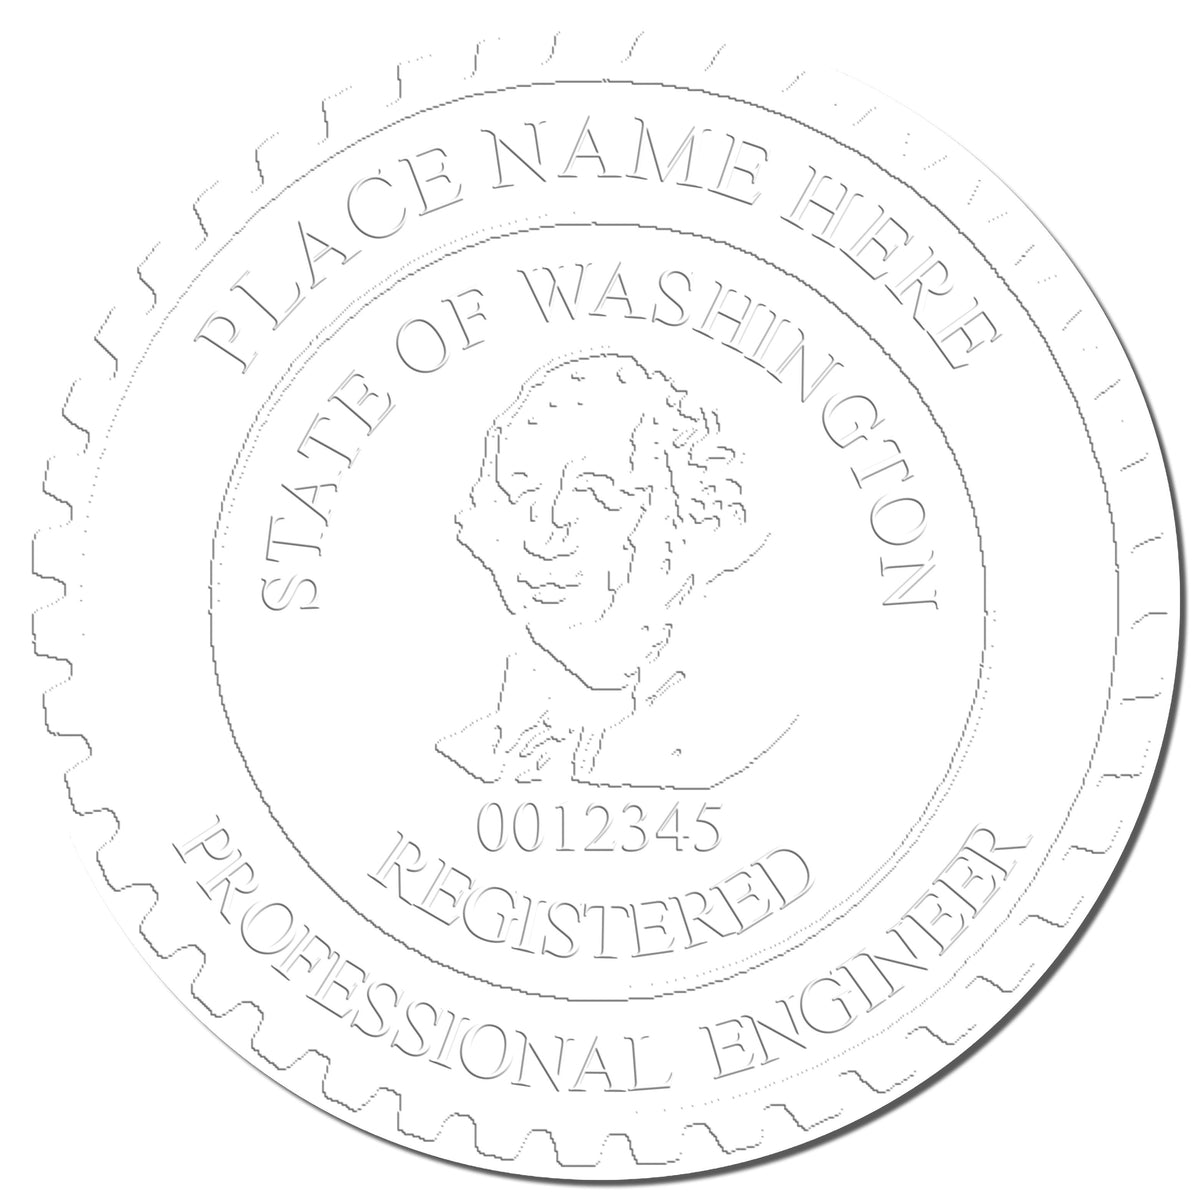 This paper is stamped with a sample imprint of the Hybrid Washington Engineer Seal, signifying its quality and reliability.